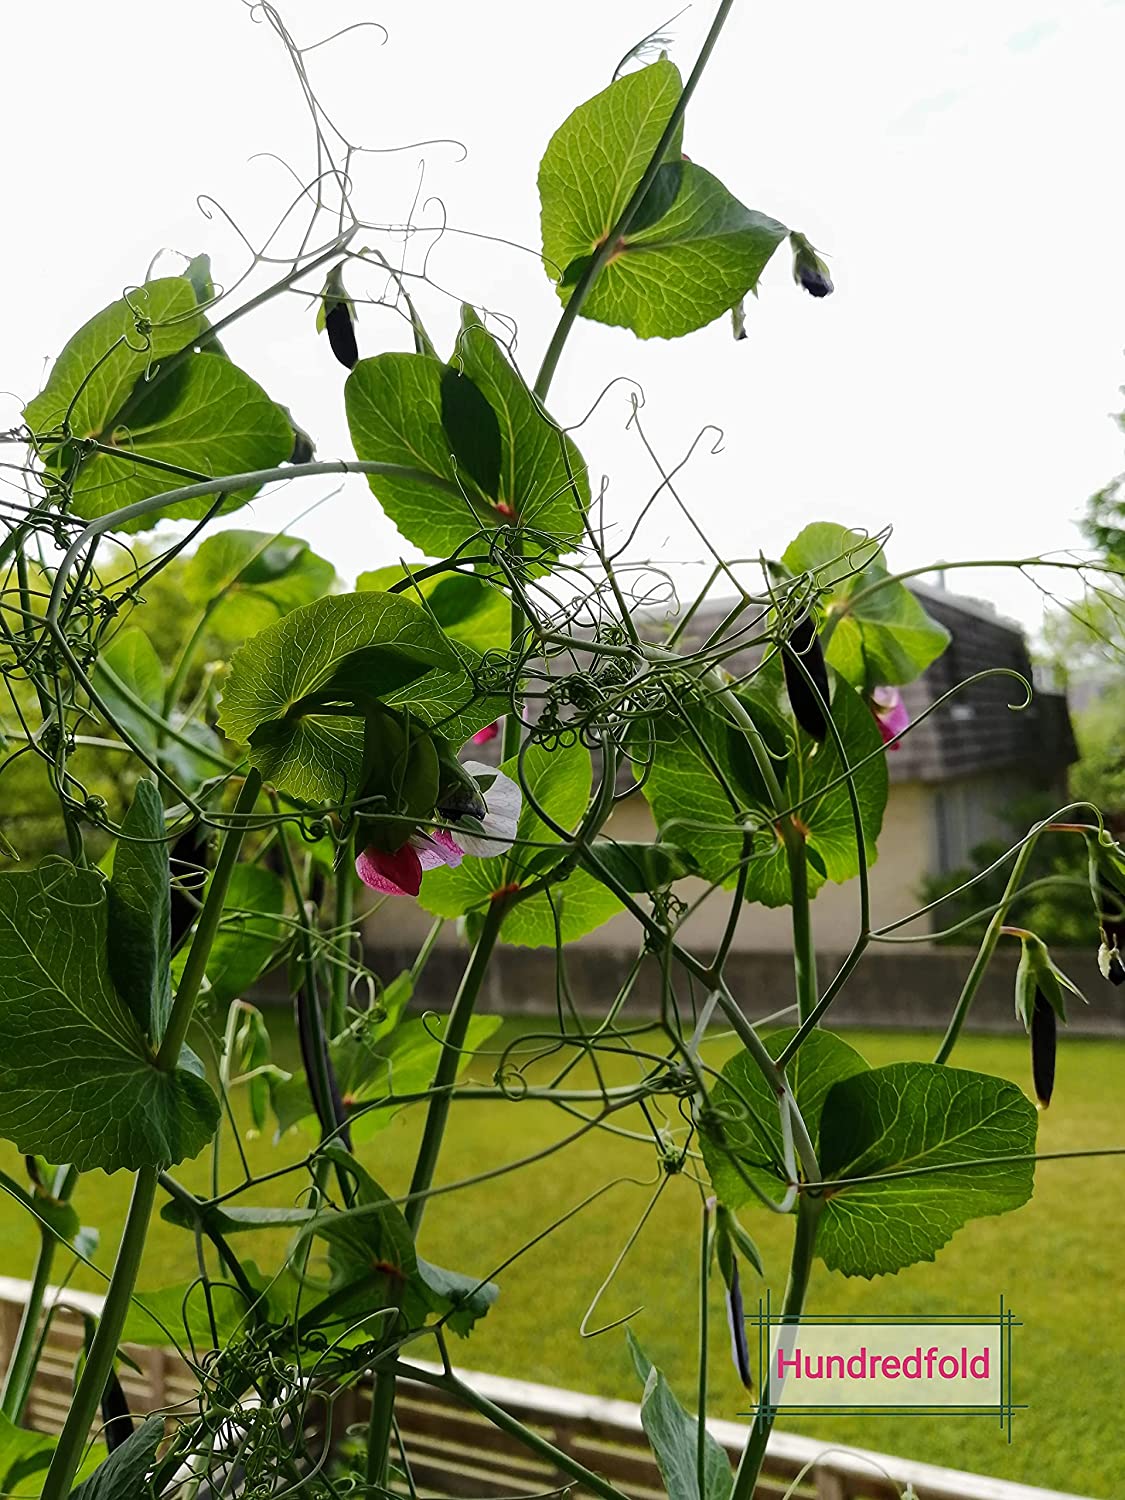 Hundredfold Sugar Magnolia 50 Snap Pea Seeds for Planting - Non-GMO Vegetable with Highly Ornamental Pink & Purple Flowers and Delicious & Sweet Pods, Tall Vines Need Trellis (Support)